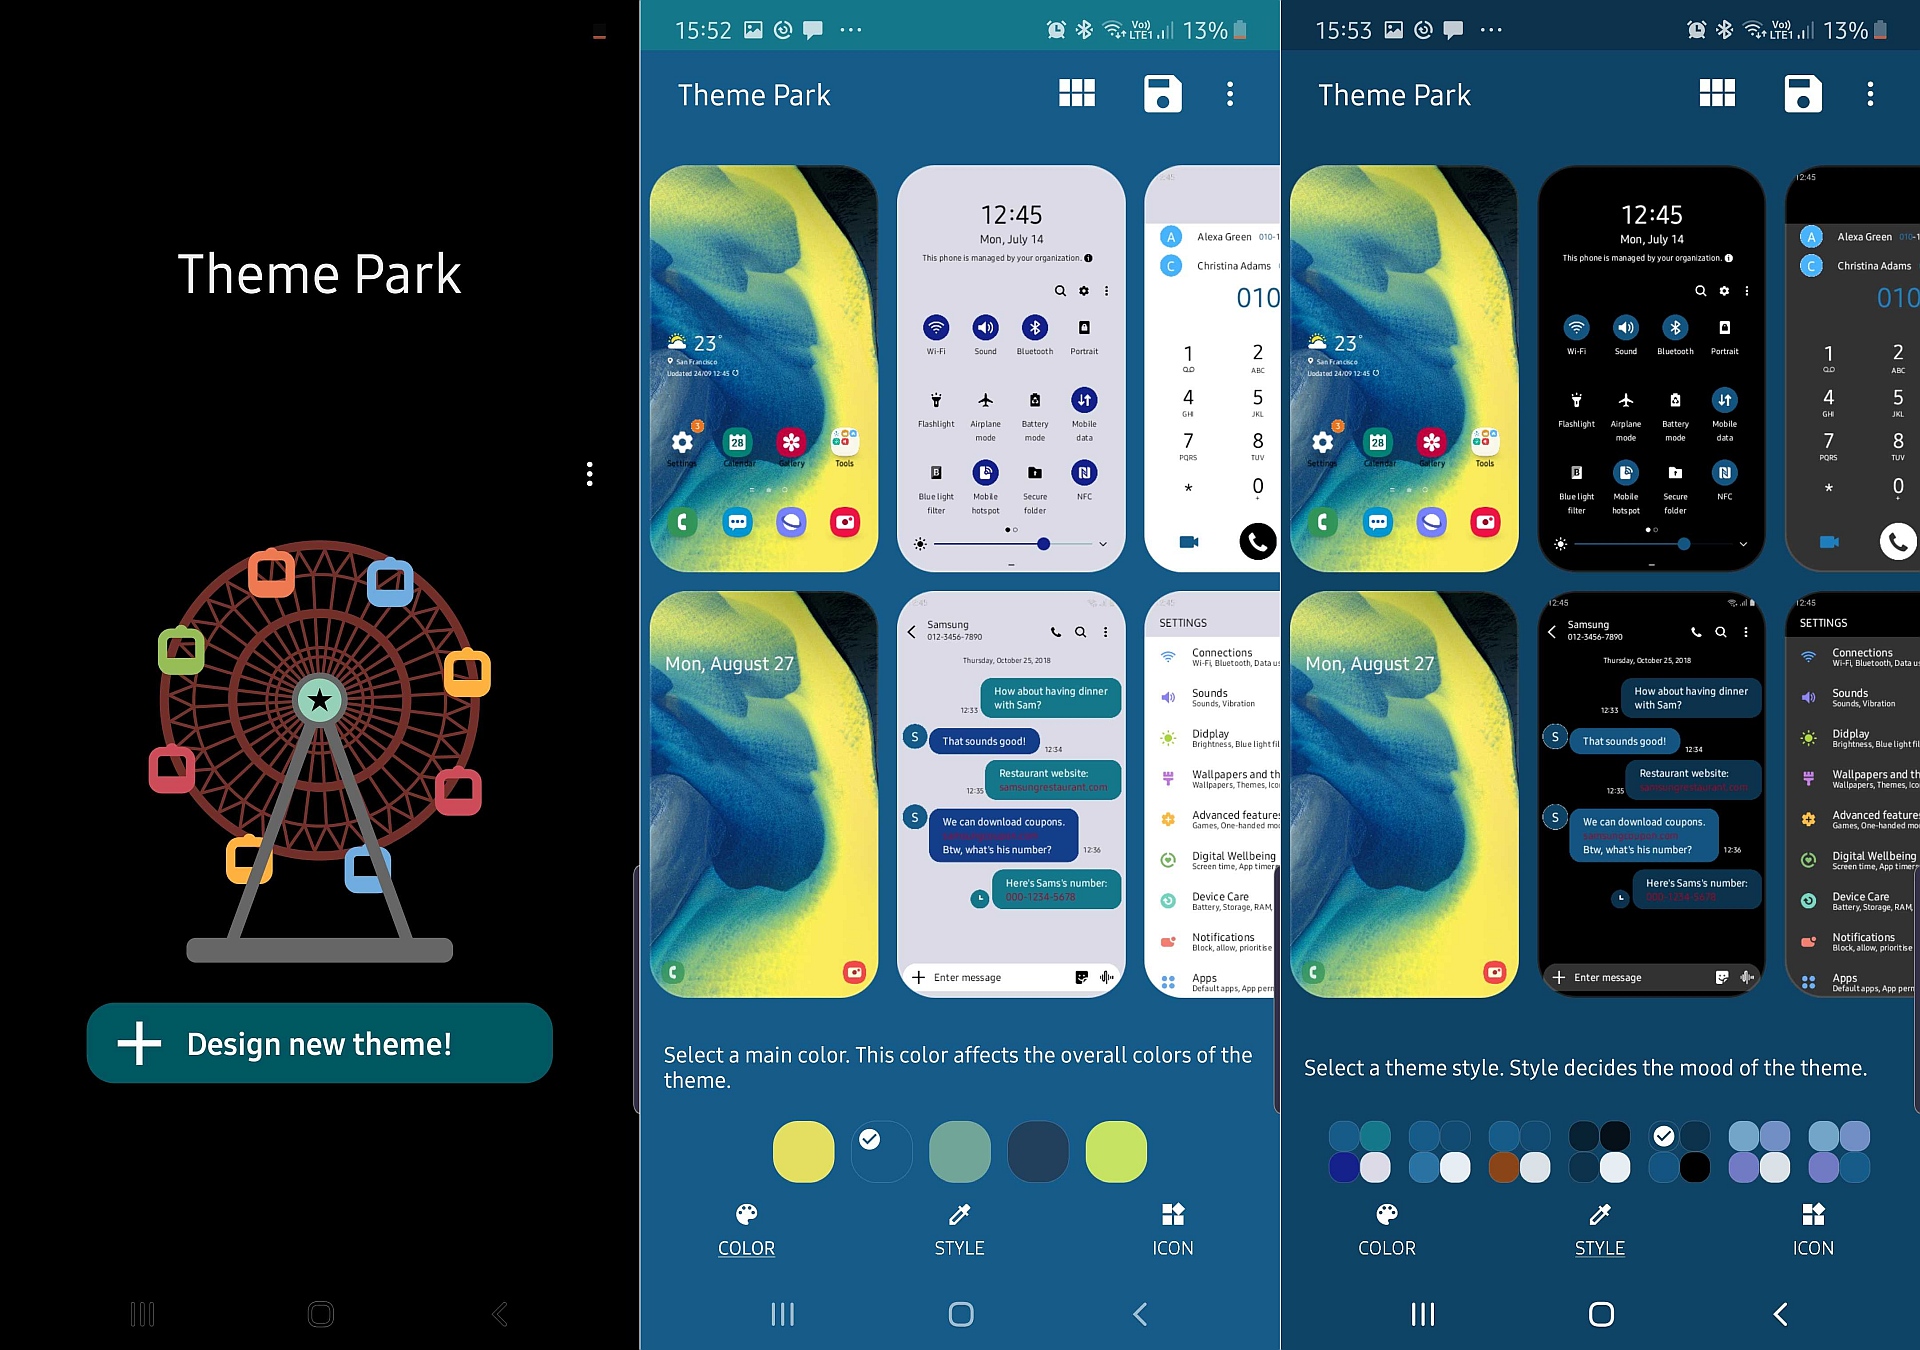 Samsung's newest app lets you create your own themes - SamMobile